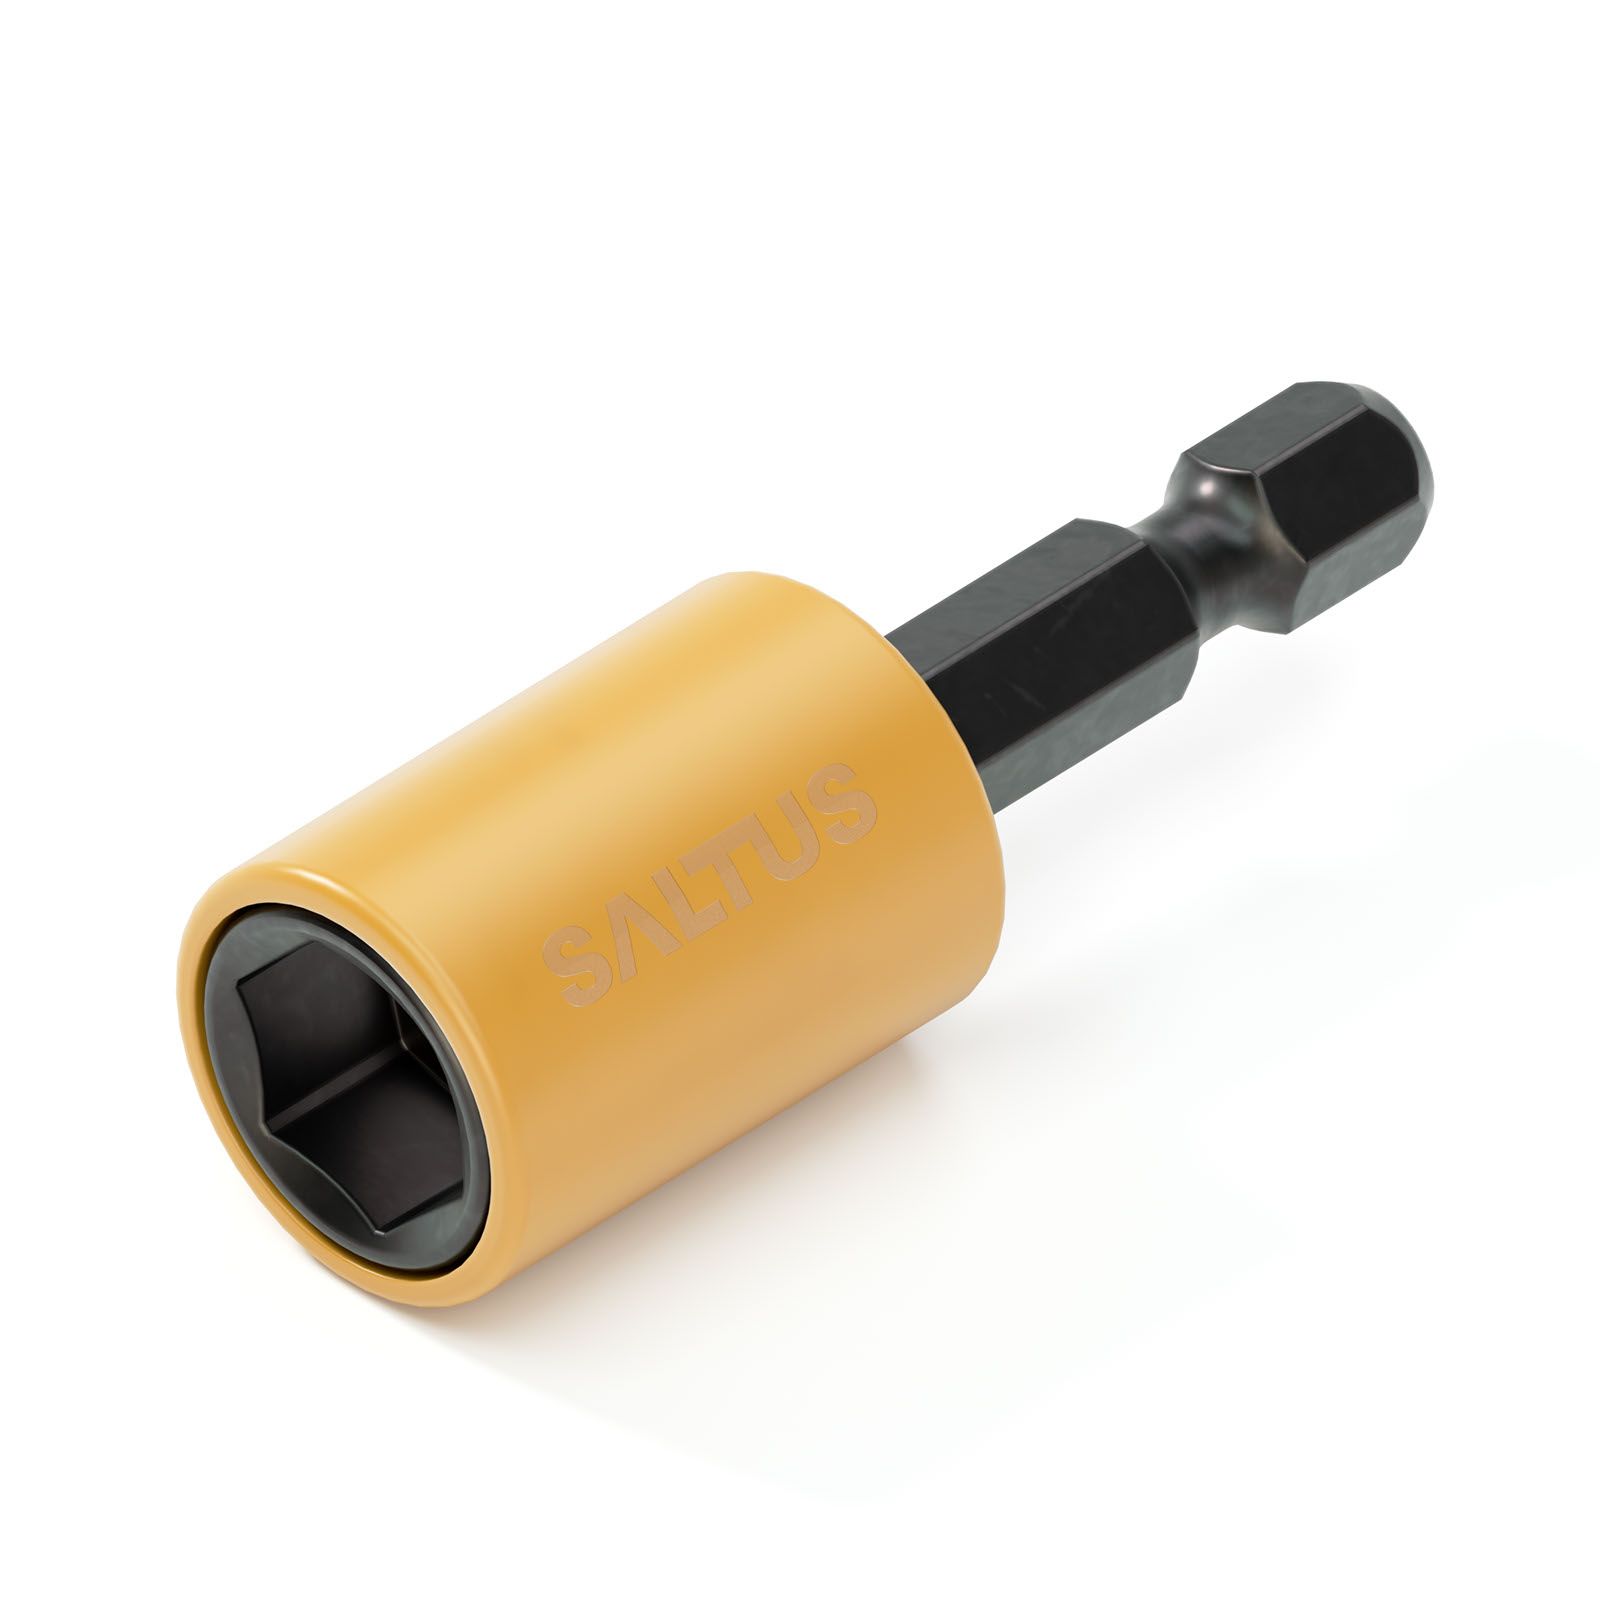 1/4" HEX Rotaction Nut Setters product photo